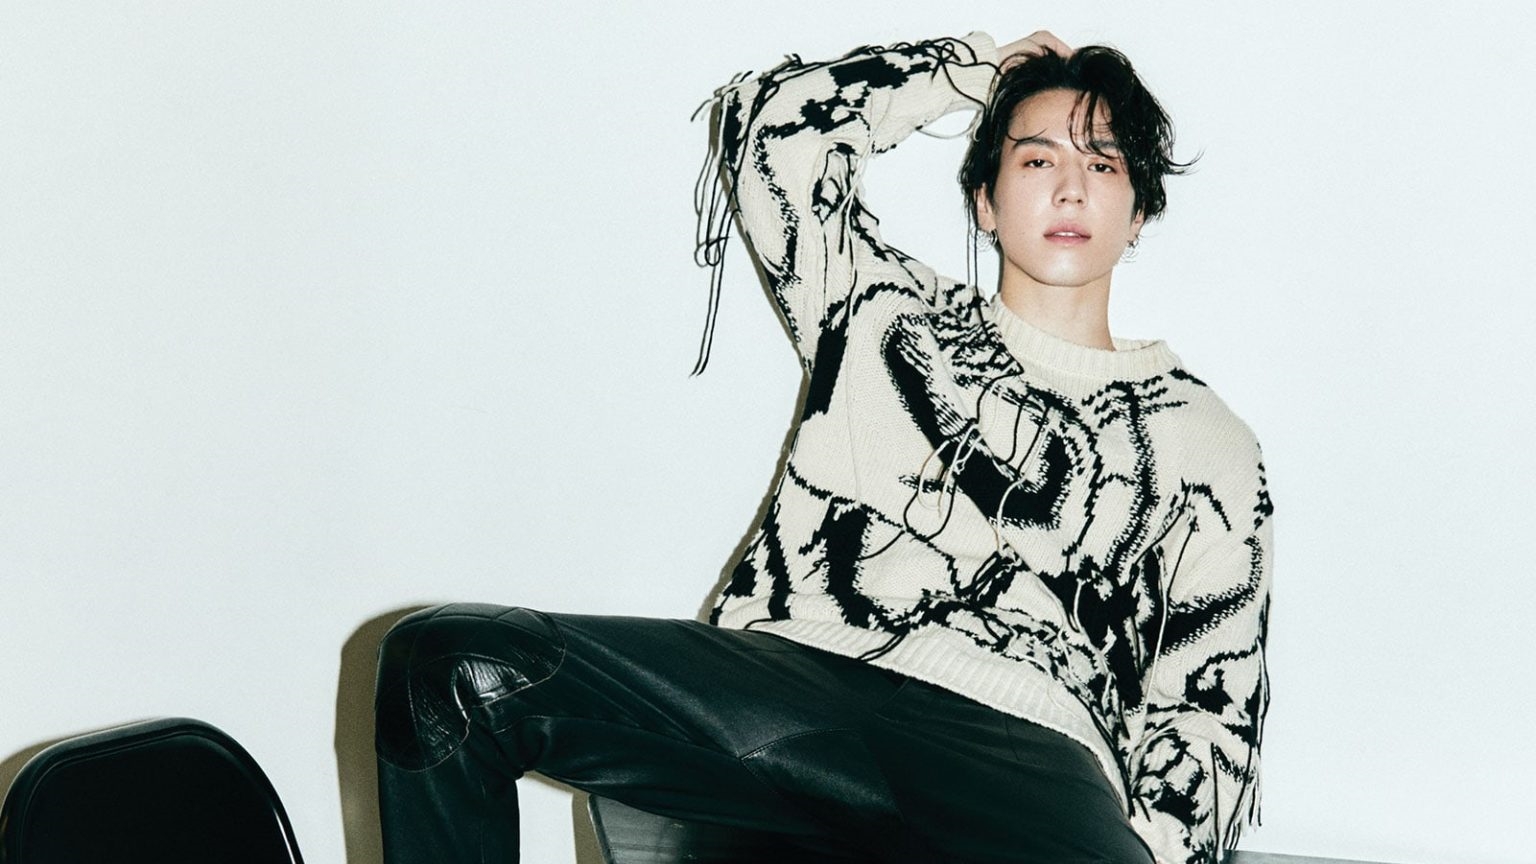 This is The Reason GOT7's Yugyeom Chose to Join The AOMG Label